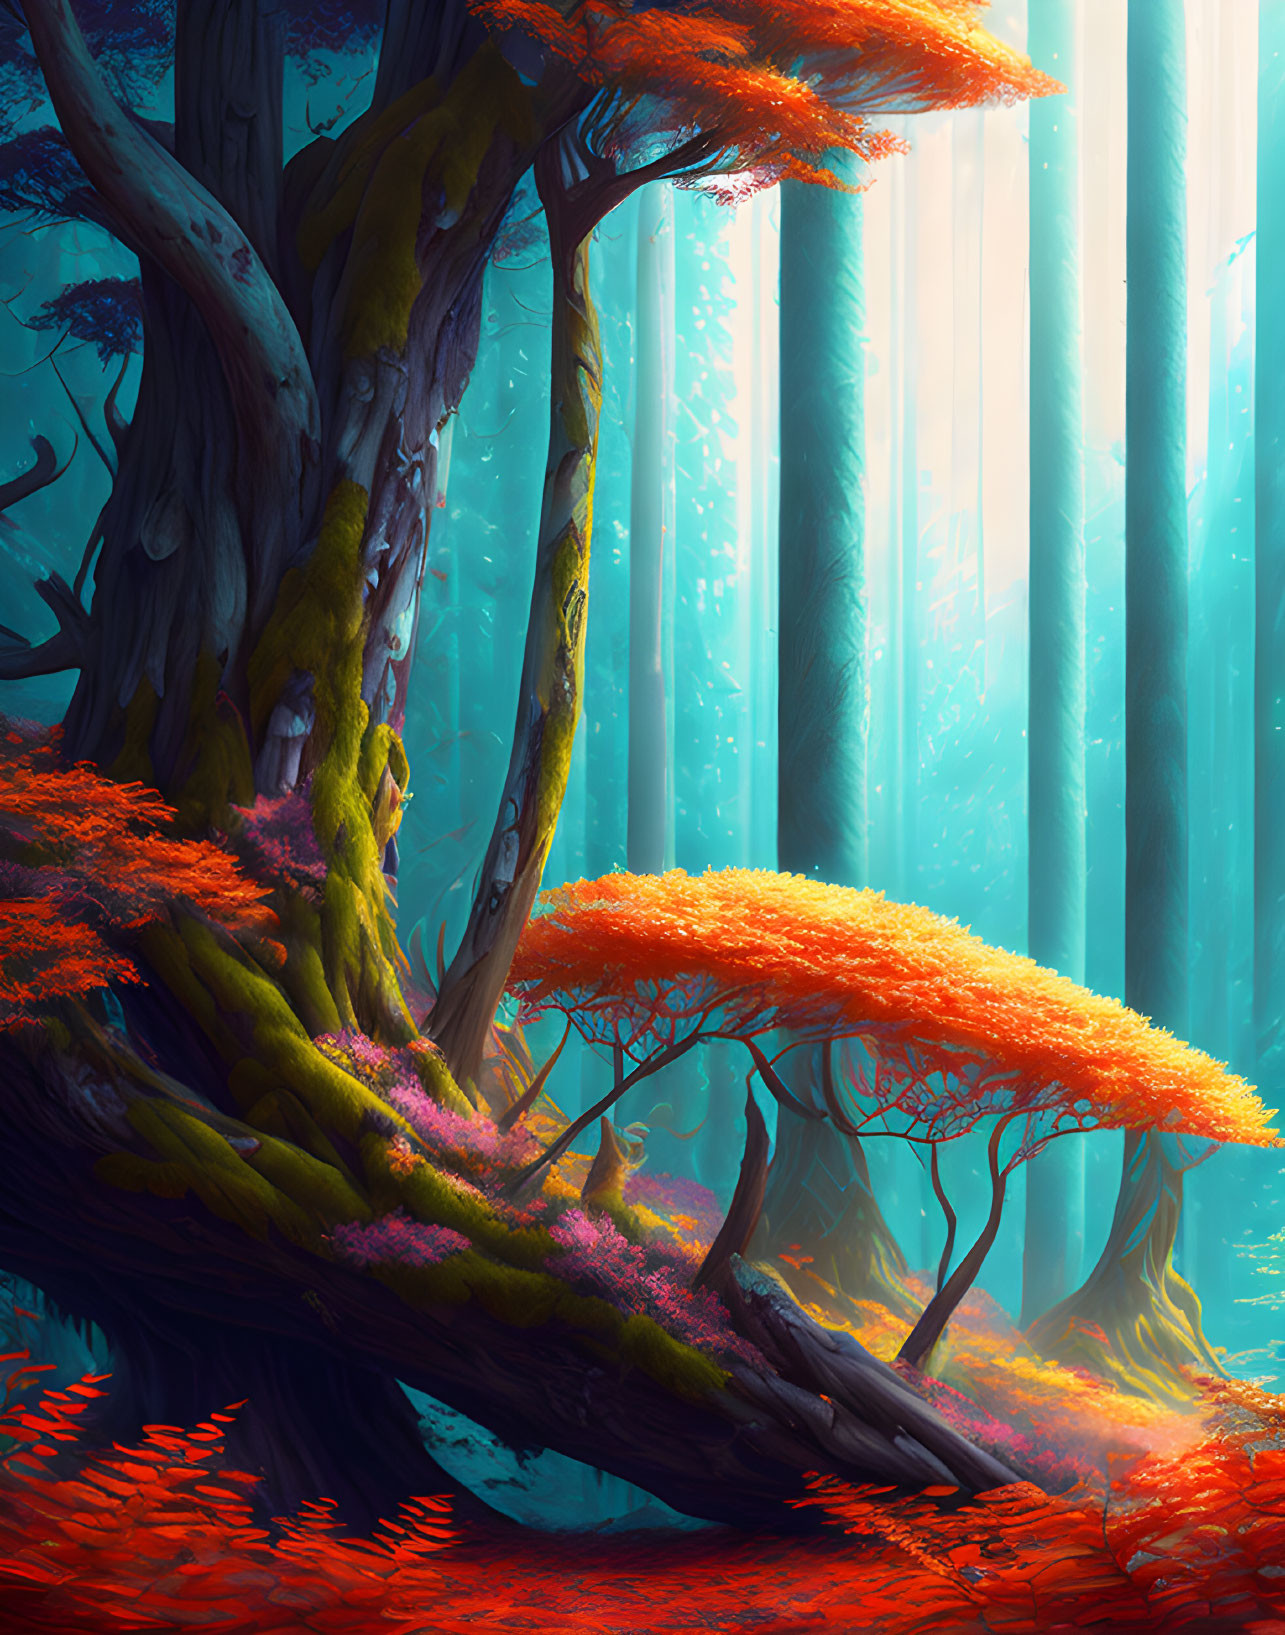 Colorful digital artwork: Mystical forest with teal trees, orange foliage, and red leaves under soft